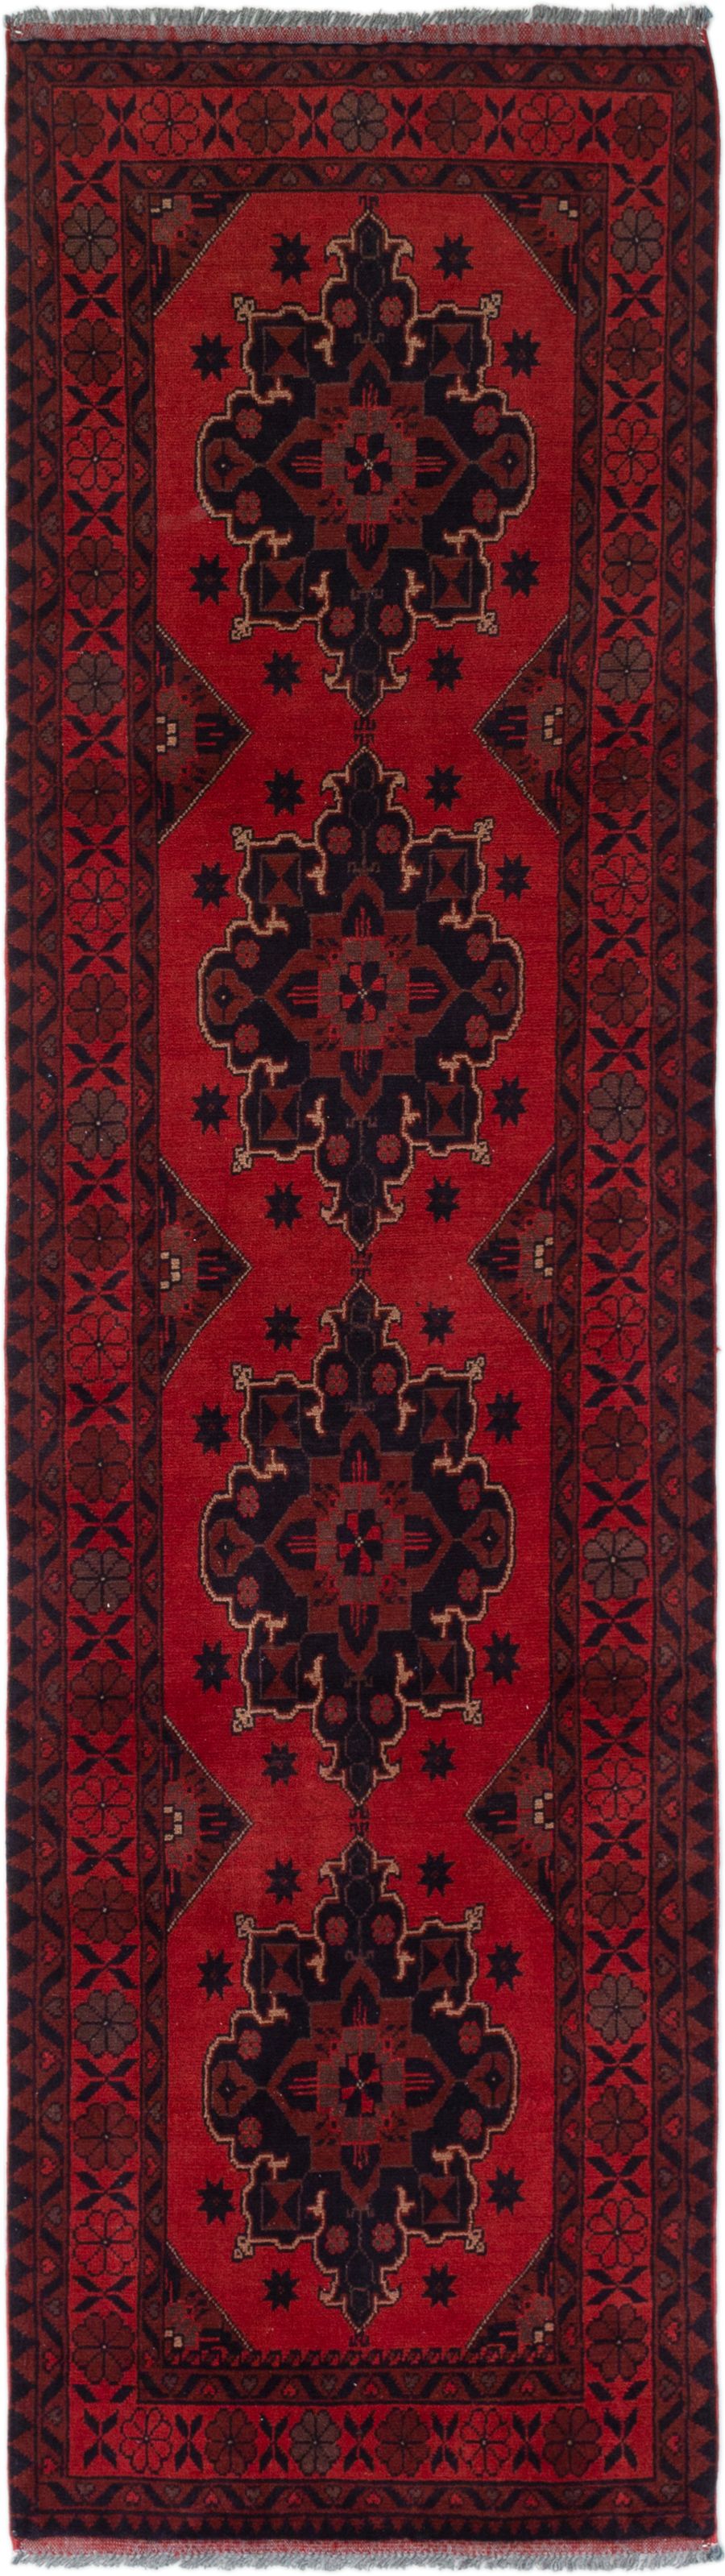 Hand-knotted Finest Khal Mohammadi Red Wool Rug 2'7" x 9'4"  Size: 2'7" x 9'4"  